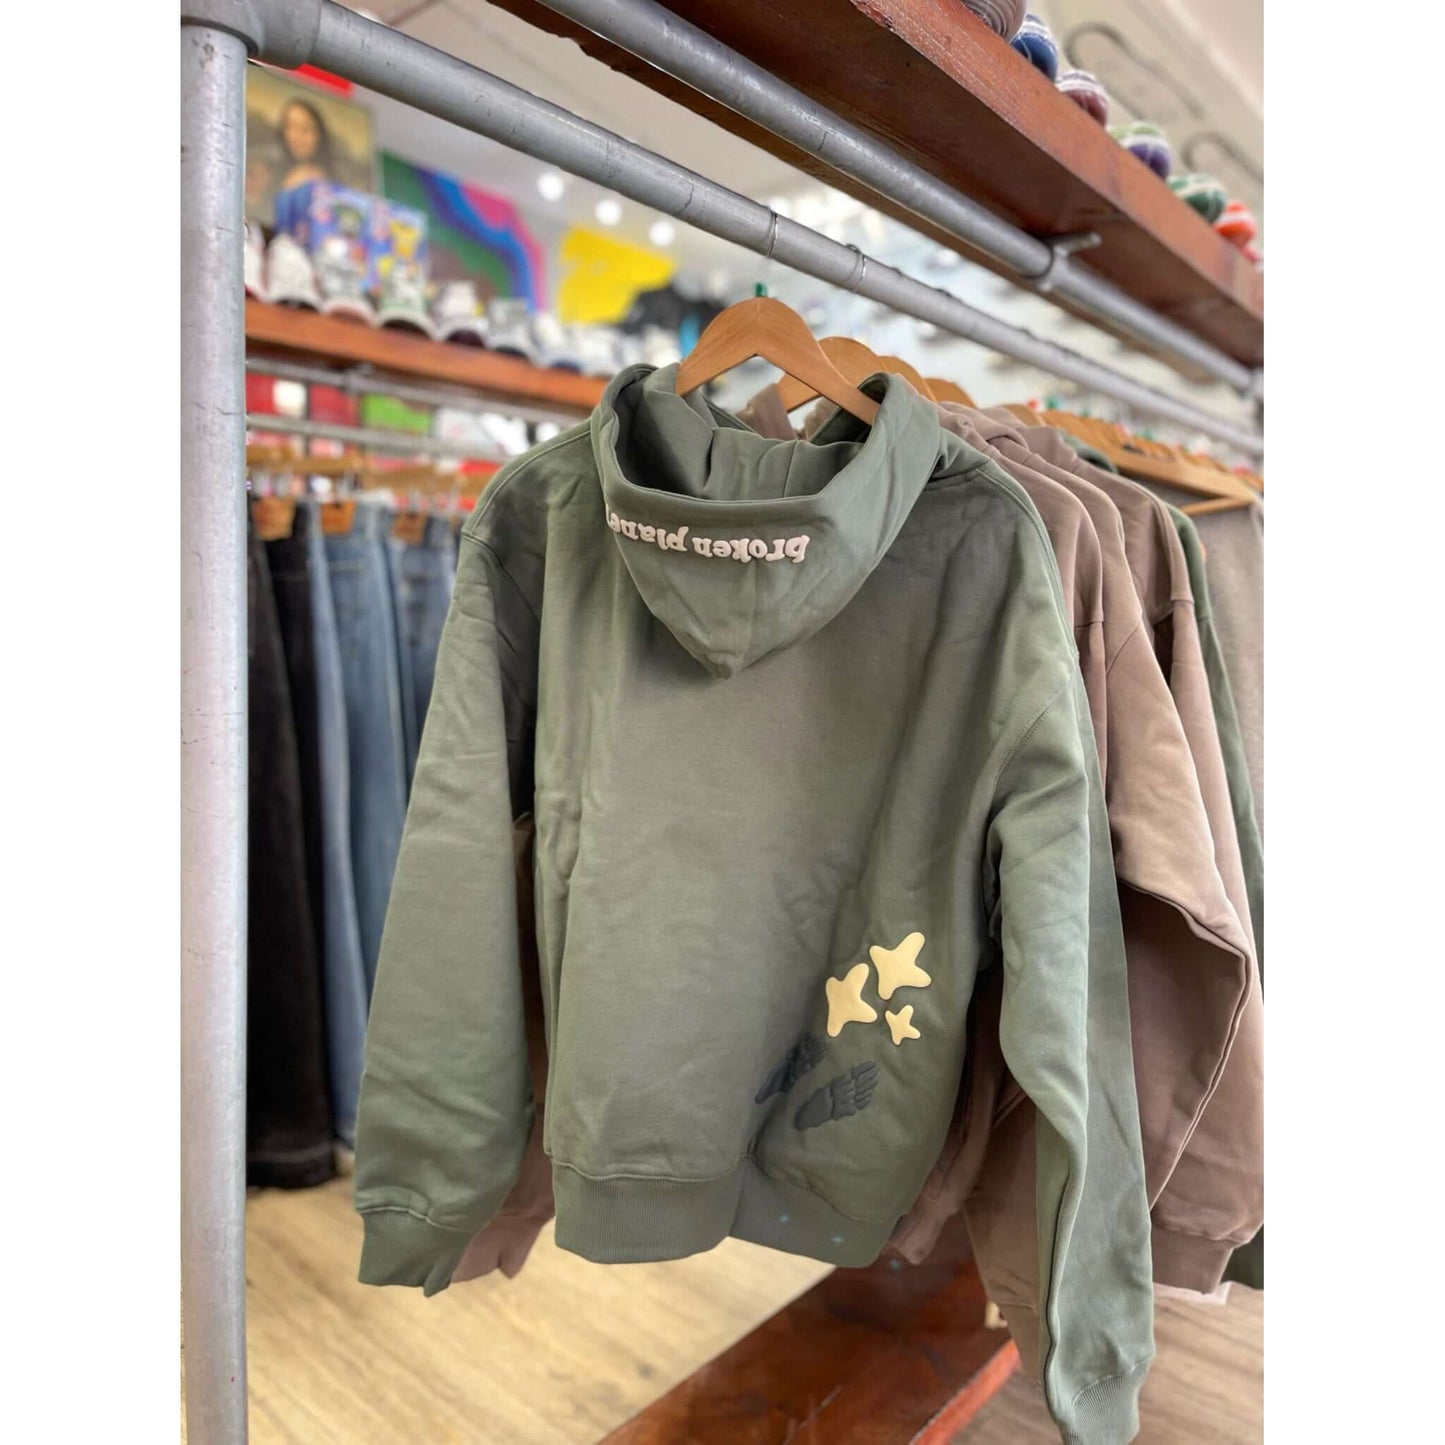 Broken Planet Market Space Trails Hoodie Agave Green by Broken Planet Market from £225.00